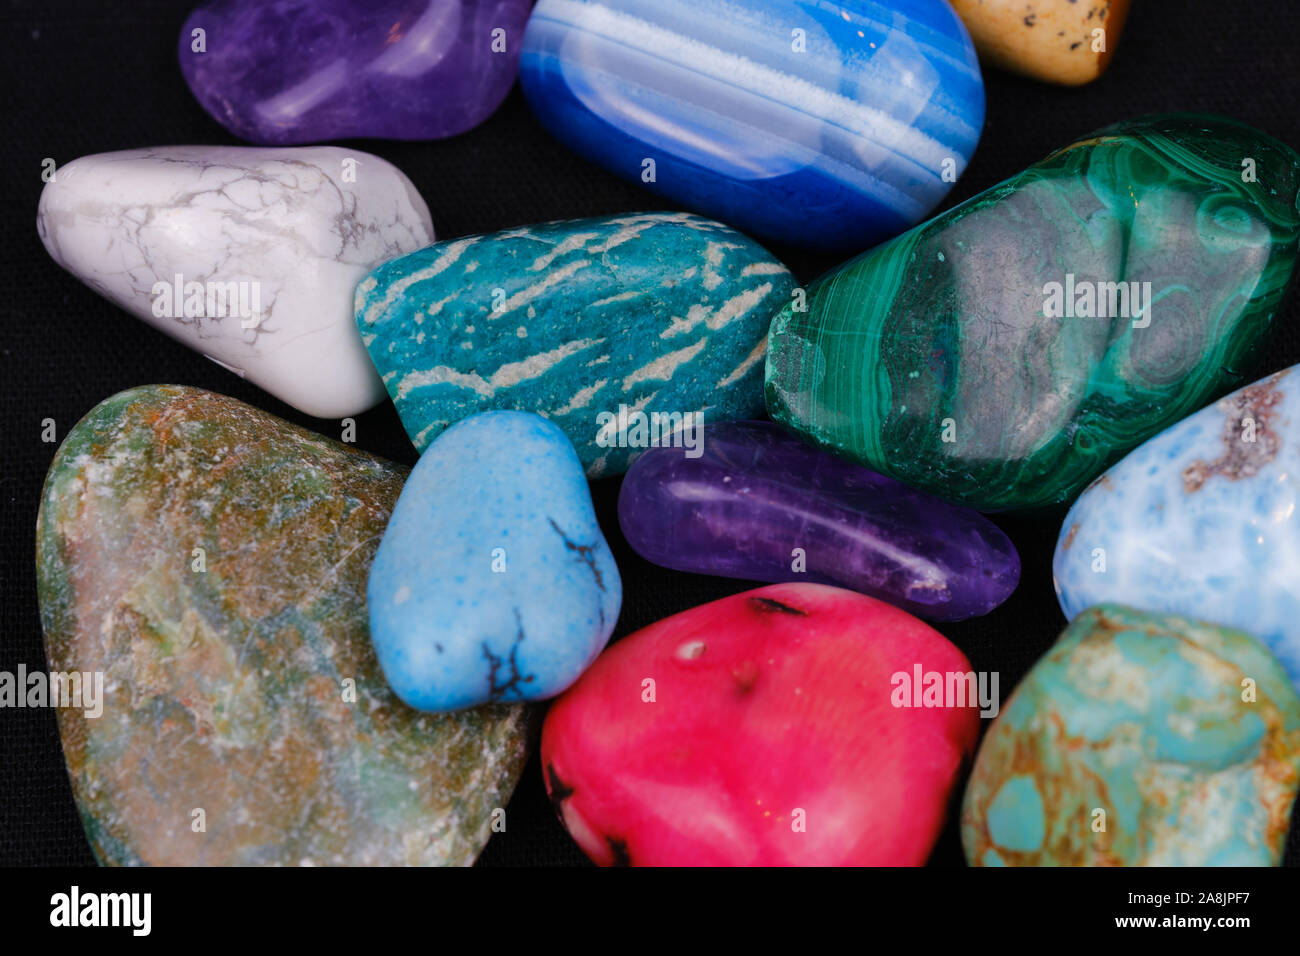 a variety of gemstones on a black surface as background picture Stock Photo